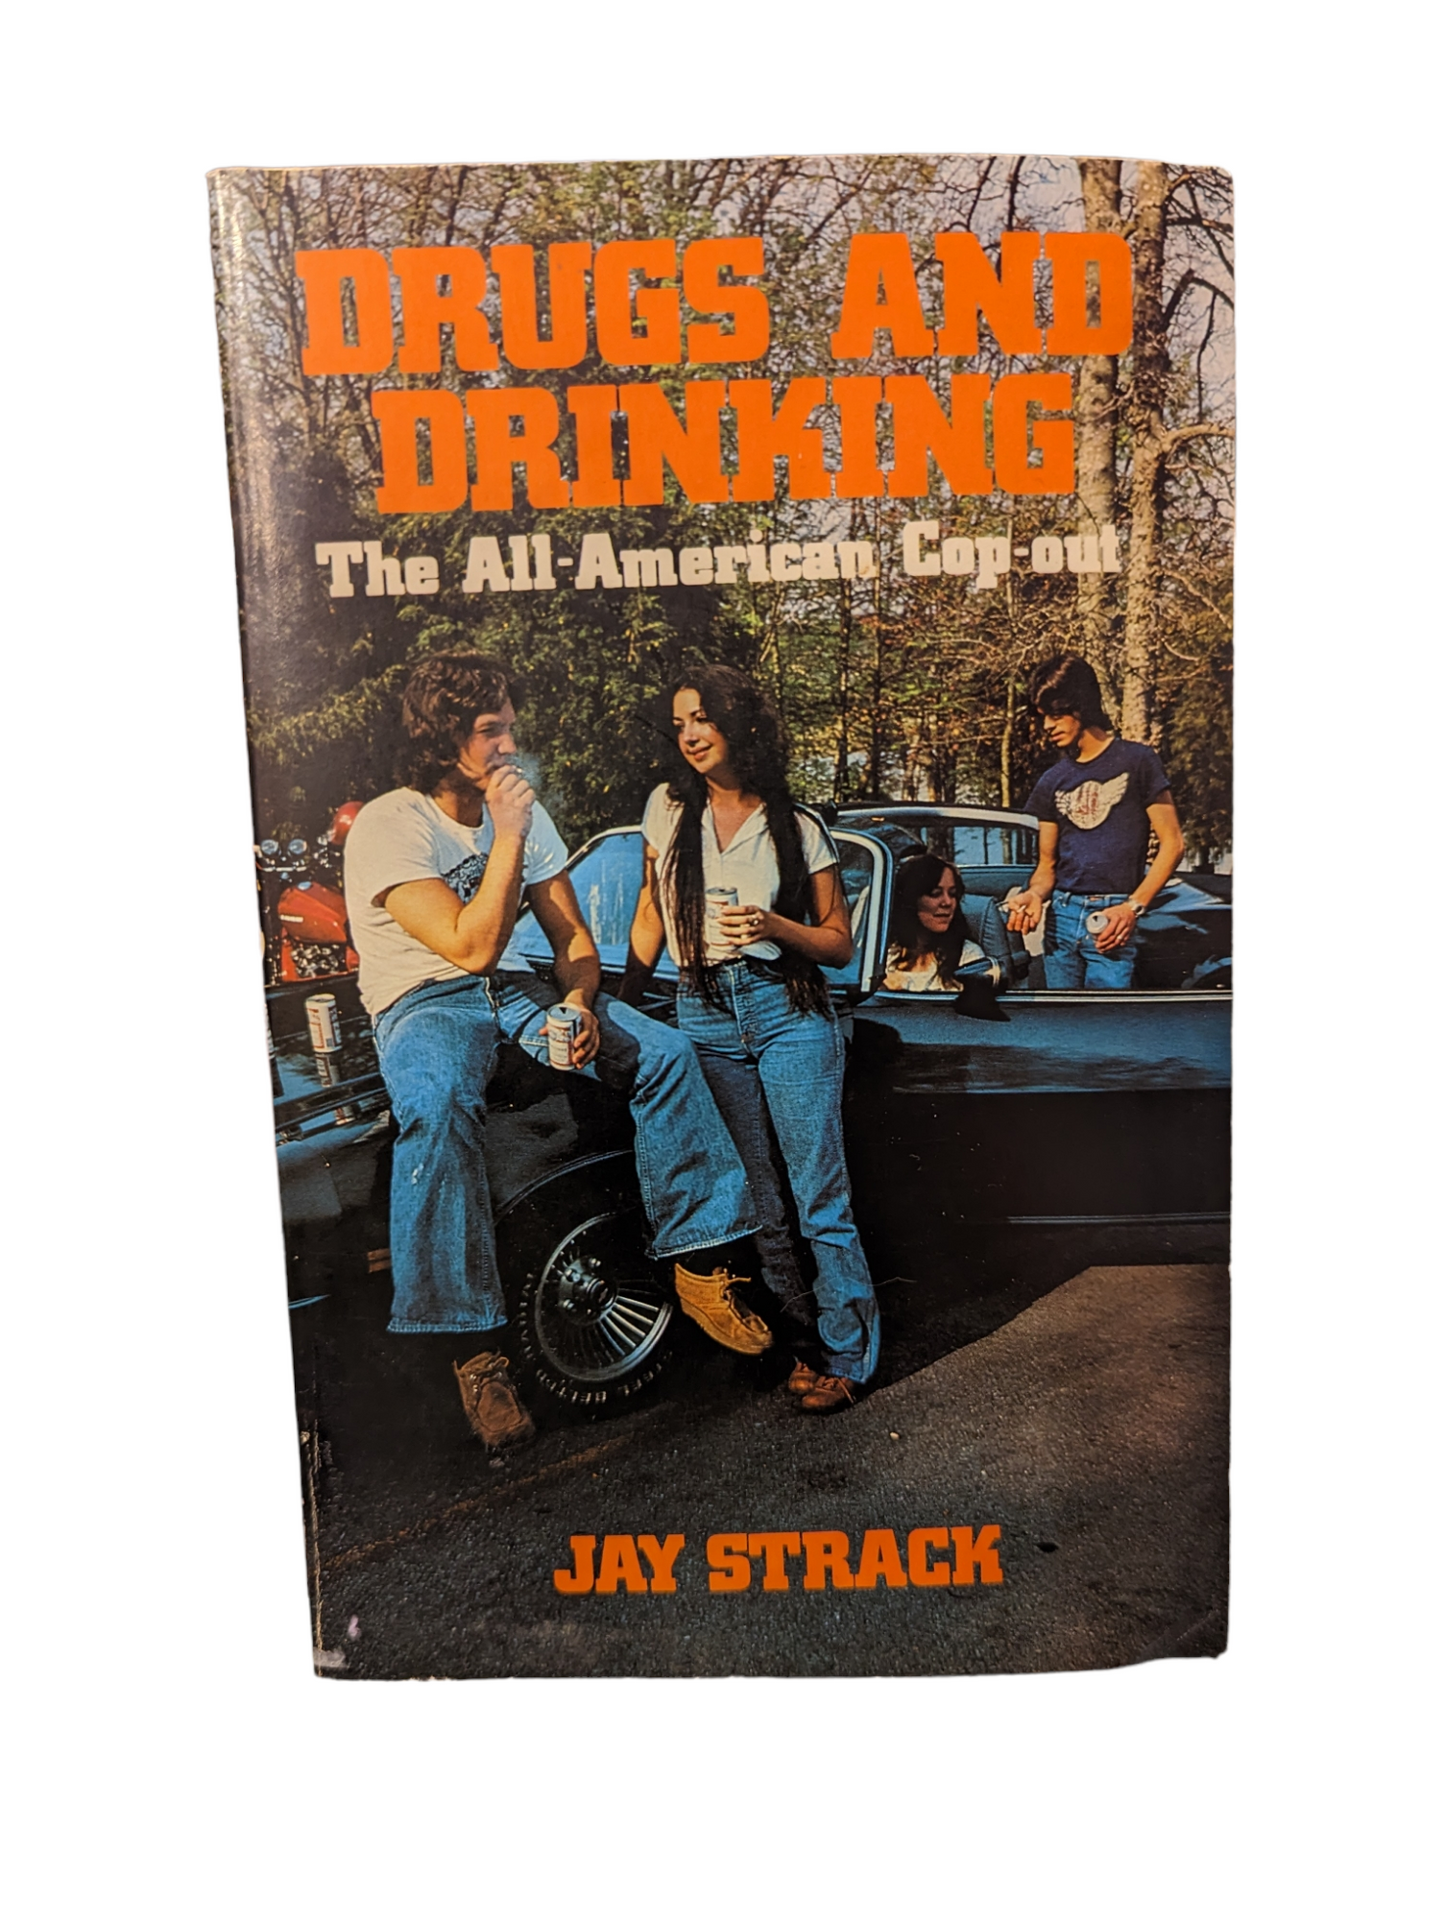 1979 'Drugs and Drinking: The All-American Cop-Out